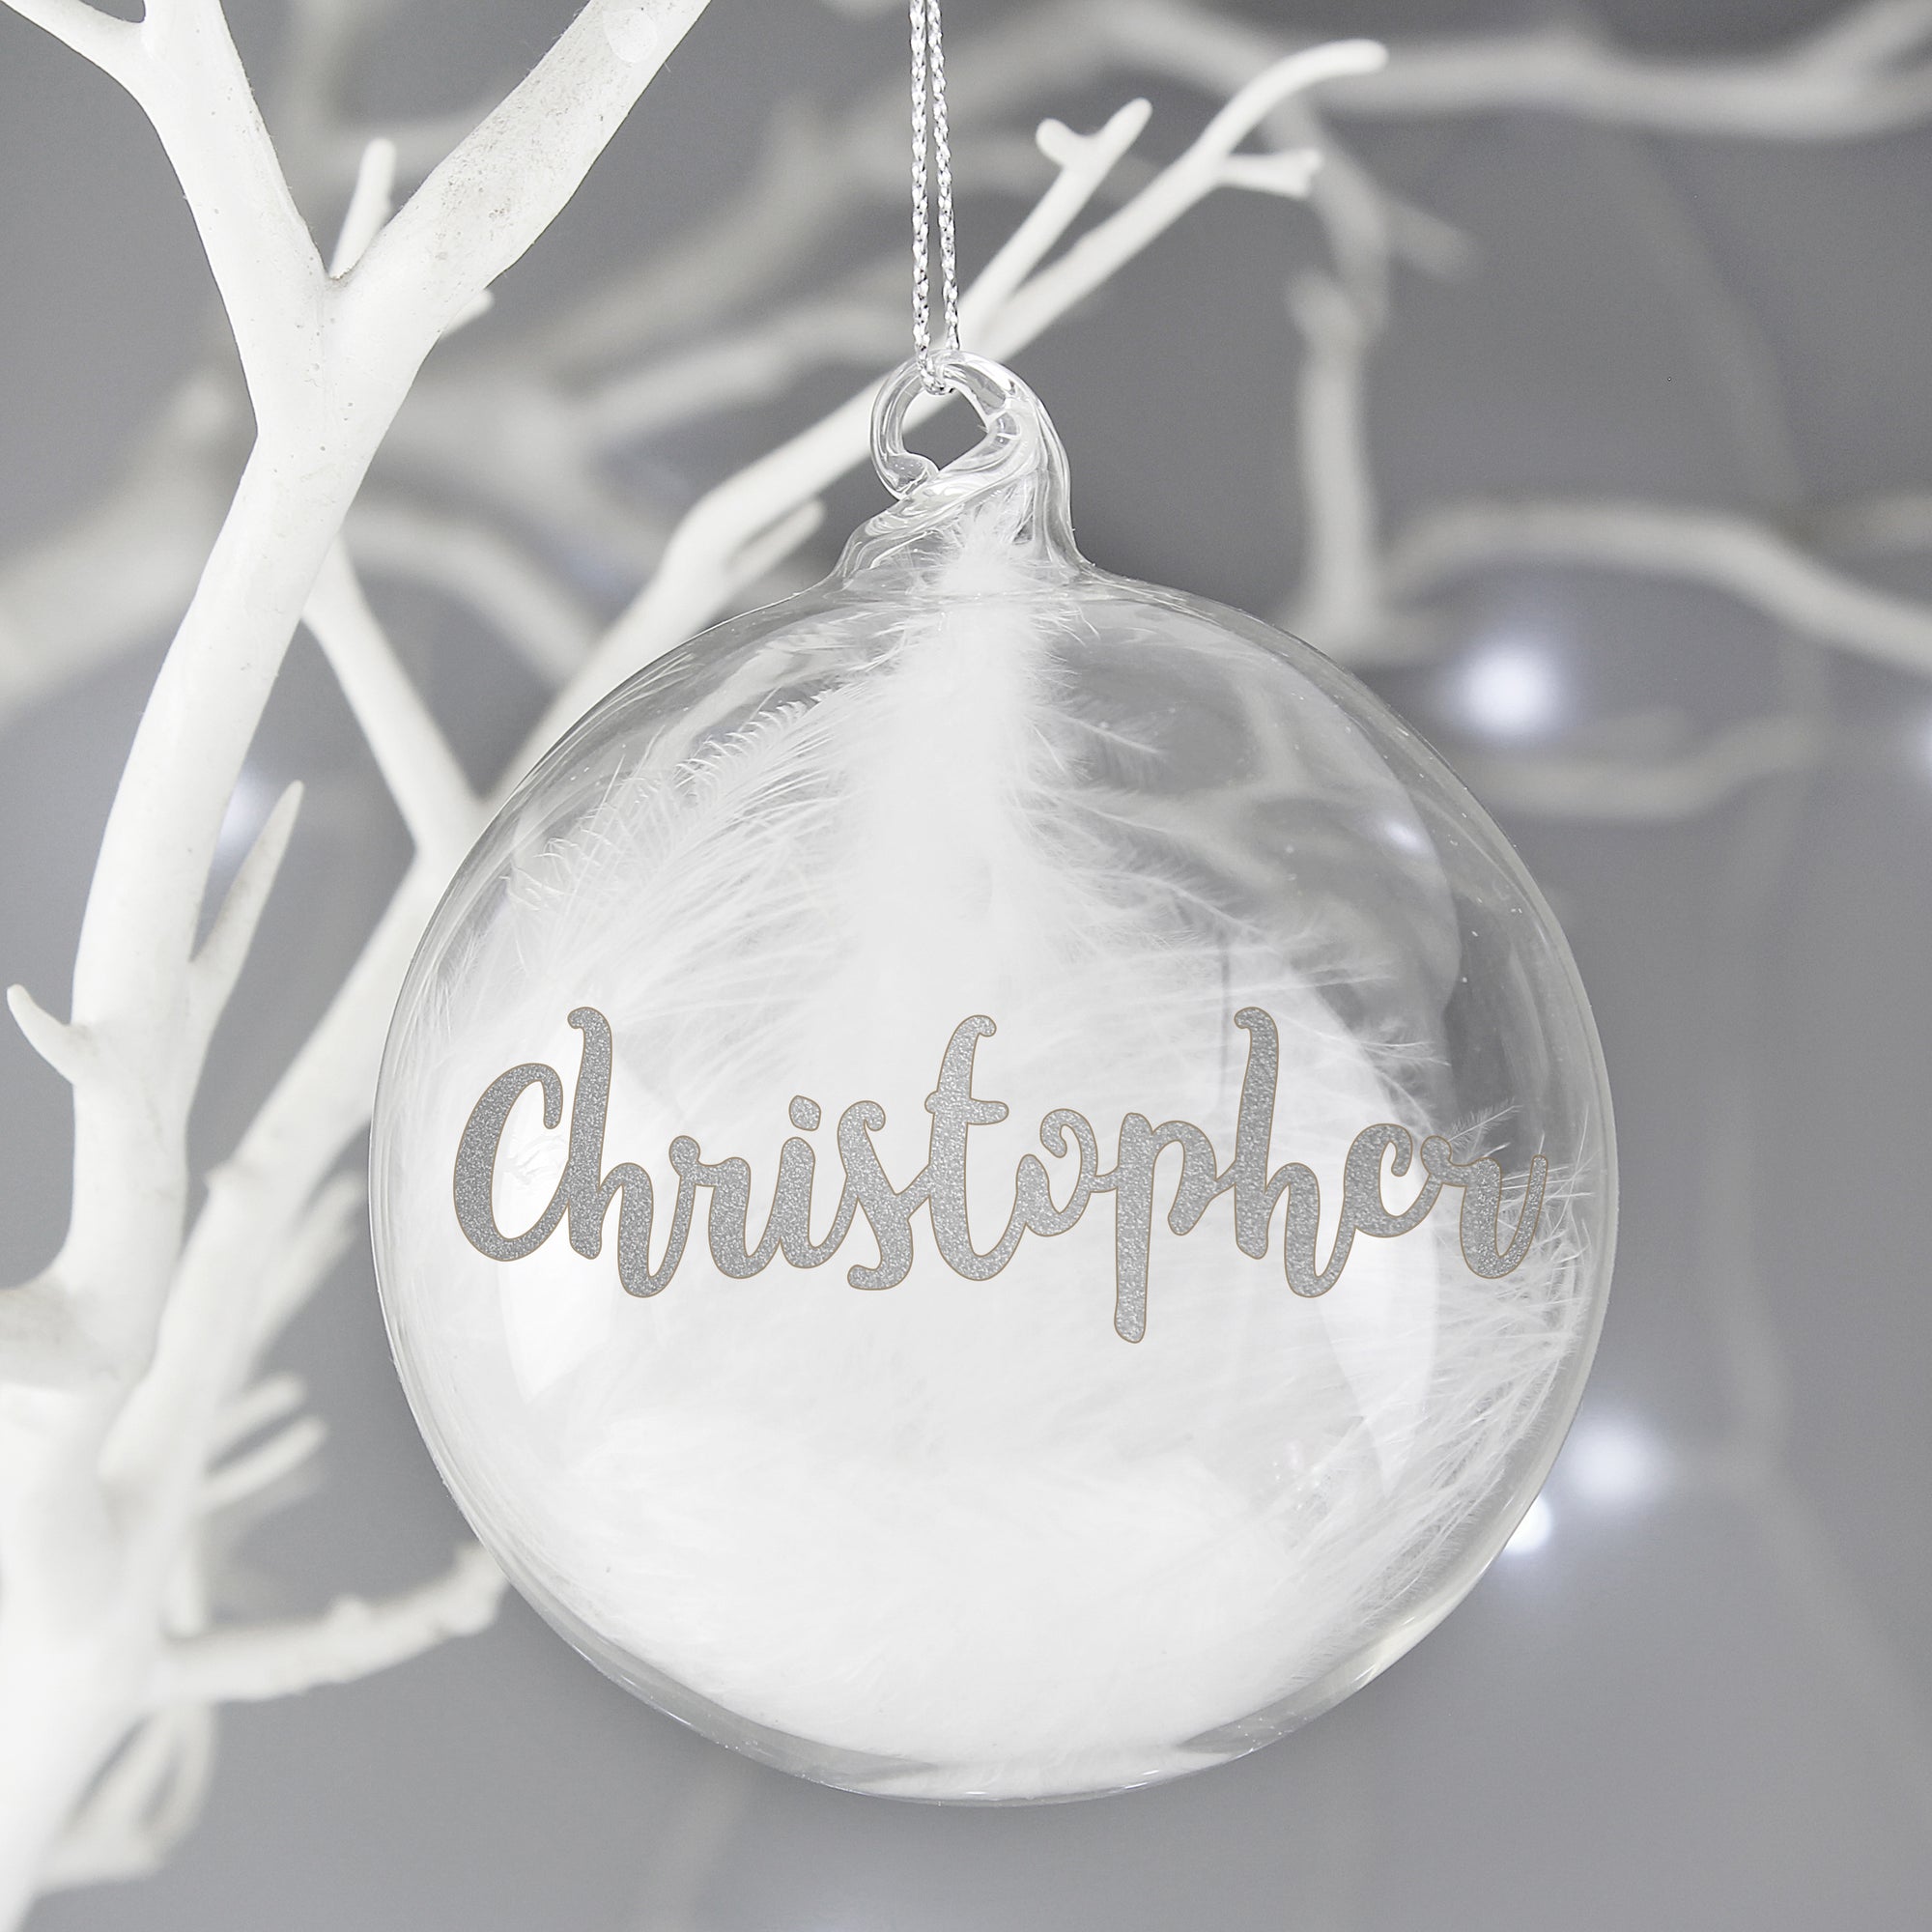 Personalised hand-made clear glass Christmas bauble that has a white feather inside it. The front of the bauble can be personalised with a name of your choice of up to 11 characters that will be printed in a silver glittery modern cursive font. The bauble comes with a string ready to hang and measures approximately 8 cm wide.